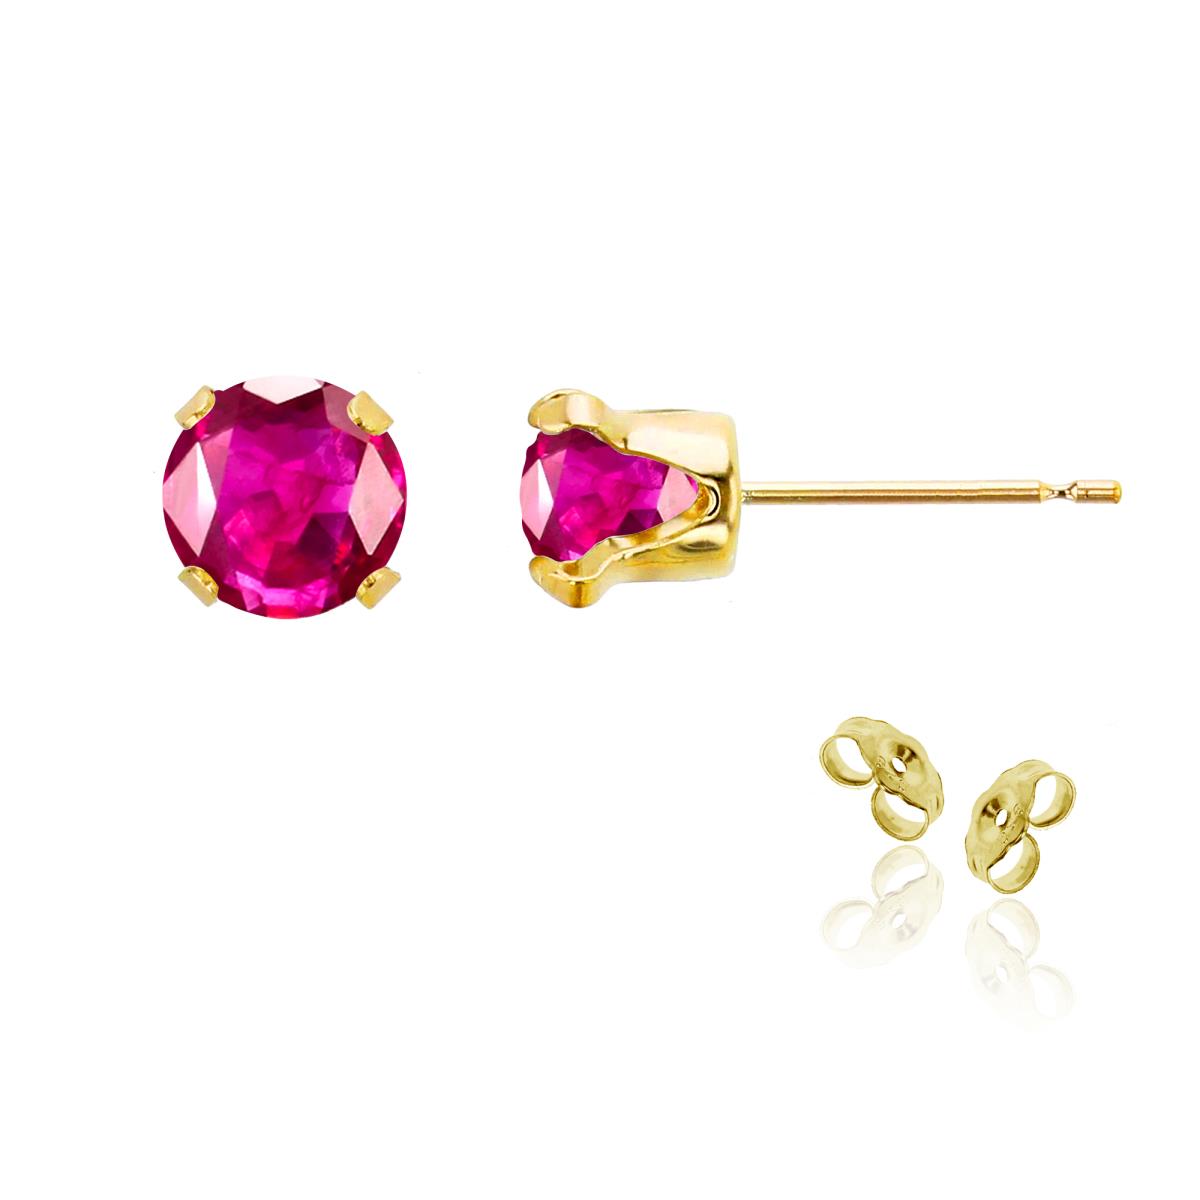 Sterling Silver Yellow 6mm Round Glass Filled Ruby Stud Earring with Clutch